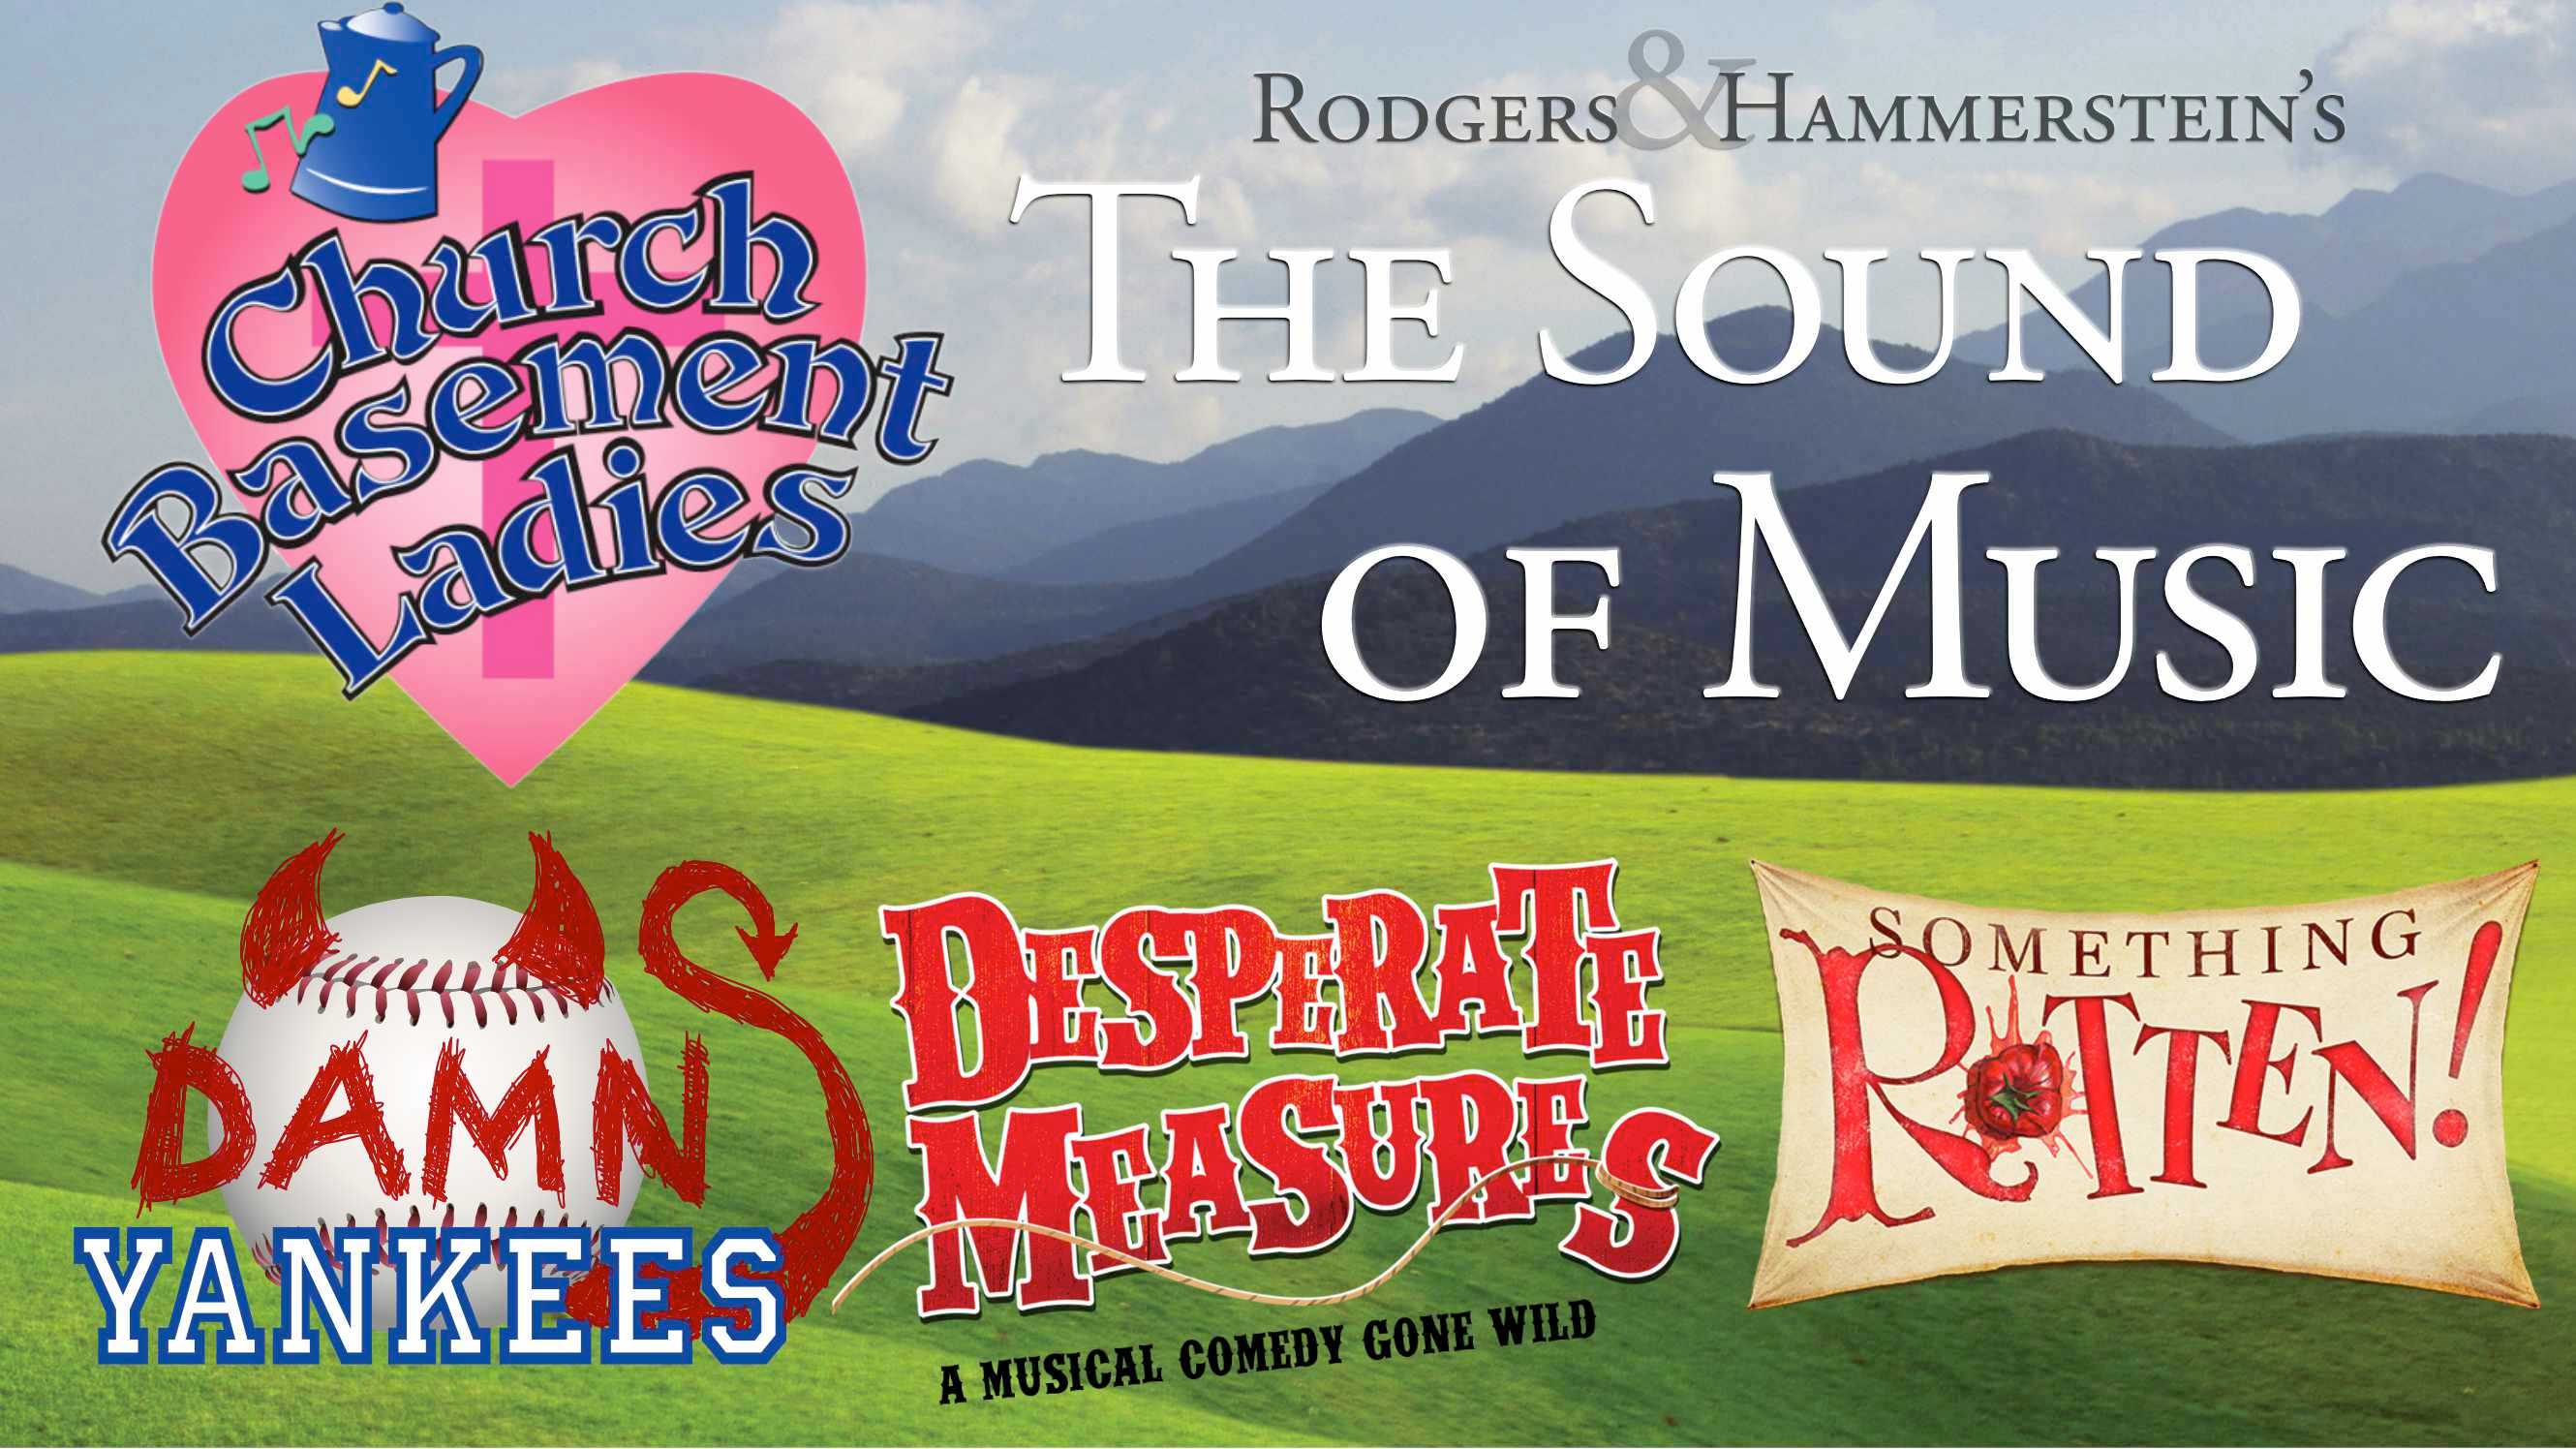 2022 season logos: The Sound of Music, Damn Yankees, Chuch Basement Ladies, Desperate Measures, and Something Rotten!